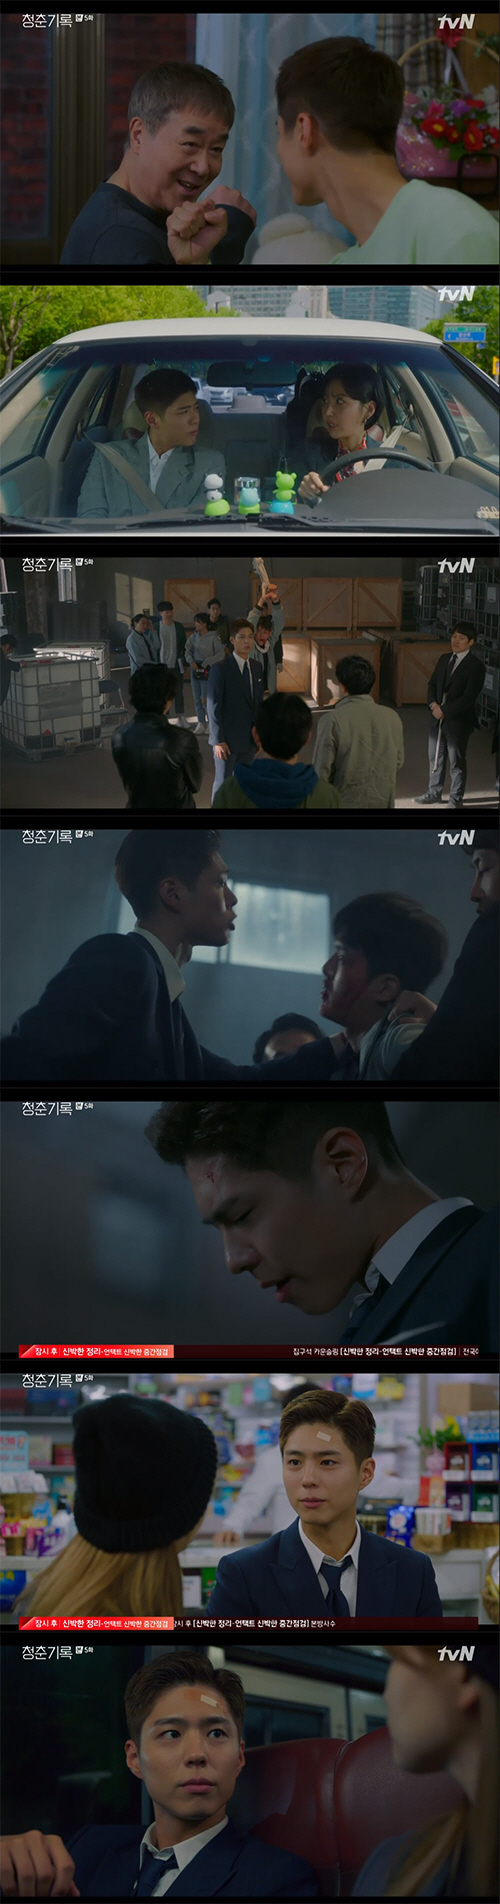 Park Bo-gum Confessions to Park So-damIn the TVN Monday drama Record of Youth broadcast on the 21st, Park Bo-gum made Confessions of the mind shaking to Park So-dam.On that day, Won Hae-hyo (Byeon Woo-suk) picked up a stable man to work together outside, saying, My dream came early.My goal was to have a brand to stabilize. Thank you for letting me do this, said Won Hae-hyo, who is stable. If you thank me, do well. I also have something to thank me.I kept Hye-joon as a fan club. We do not need to protect it now, we have solved it. Now, thank you for one thing, he said.Lee Tae-soo told Sa Hye-joon, who met in the bathroom, I sent you out and bought a building.I could just get rid of one of you, said Sa Hye-joon, breaking his arm and ignoring him.Lingnan (Park Soo-young) told his wife Han Ae-sook (Ha Hee-ra): When you try to go to the house, you take good care of your clothes.It is also a clothes worn, he said, and Han Ae-sook explained, When I was a child, I wore clothes. At this time, Sa Kyung-jun (Lee Jae-won), who returned from seeing the house, said, I came back from outside after seeing the house. Mom, stop working now. I will give you a month.In addition, Sa Kyung-joon declared, I will be independent as an officetel near the company.Han Ae-sook asked, How much is the rent? And Sa Kyung-joon said firmly, 90 at 500. So Han Ae-sook hit Sa Kyung-joons back saying, He looks like his father.Han Ae-sook opposed independence, saying, He knows that he has vanity and bluff. He is a perfect father.Steaming video (Shin Ae-ra) told her daughter Hannah Jeter (Jo Yu-jung): I passed law school, but where are you going?I should celebrate with my family. Hannah Jeter said, I passed my aunt, he said. I passed my aunt. Steaming video told Han Ae-sook, who works as a housekeeper, Sit down and drink coffee, but Han Ae-sook refused, and Steaming video said, Normally, I draw a line from my side.Its a bit weird, he said.Earlier, the clock was missing from Steaming videos house, and Han Ae-sook, who was suspected, quit his job.However, Steaming video did not like the new housework assistants, and eventually met Han Ae-sook, who works elsewhere, pretending to be a coincidence. Come back to my house.Ill give you the rain in time. I dont like it, and I wont come anymore. He said, 100,000 won a day.Han said, It was not easy to work at my sons friends house. But my son cheered me. It was good to be a self-esteemed son.But I am praised for every place I learn to work hard. I will go if I need it. Han Ae-sook also informed Sa Hye-joon, Today, at 8 oclock, the family meeting will go out. Please attend.In the story of a stable Sa Hye-joon and Won Hae-hyo, he went to a Chinese house in a car with a stable Sa Hye-joon and Lee Min-jae (Shin Dong-mi).While I was parking a stable parking lot with Sa Hye-joon, who moved to the restaurant, the child came out and an accident occurred. Sa Hye-joon wrapped his arm around the stable and said, Why did you already unfasten your seat belt?An Jeong-ha and Sa Hye-joon had a fight, and Lee Min-jae, who was behind them, misunderstood, Are you two dating?When he returned home, he persuaded him, I am in favor of going home, do you have a room? Han Ae-sook said, I am against independence.If you add the monthly rent to 90, you will not be able to collect money for a lifetime.Sae Kyung-joon said, Hye Jun said that it was inconvenient to use a room with his grandfather. Sae Hye-joon said, If you talk like that, do not you think that my grandfather is uncomfortable to use a room with my grandfather?My brother is a typical split, he said angrily.I know those children well, the people who cheat are obvious, said Samingi (Han Jin-hee), who told Sagyeongjun, who is going to go out alone. I have now paid for the crime.Where is the bigger sin? He was angry at Lingnan, who sided with him.When he returned to his room, he informed Sa Hye-joon that he had made a senior model decision, saying, I decided to model. I will show it to your father because it is good.Sa Hye-joon drove to the filming site with Lee Min-jae. Sa Hye-joon said, I was analyzing the carcutter and the character talked to me.Won Hae Hyo and Sa Hye Jun went to the filming site to get makeup from Ahn Jung-ha, and Won Hae Hyo said, Today, Sa Hye-joon hits Park Do-ha. I have to go to see after shooting.So An Jeong-ha also said, I will look.Actor is Actor, said Won Hae-hyo, who watched the shooting scene of Sa Hye-joon. Won Hae-hyo wanted to praise Ahn Jung-ha, saying, Did I do that?Sa Hye-joon changed his ambassador unlike practice, and the director immediately revised the scenario, saying, It seems to be okay. After that, Sa Hye-joon hit Park Do-ha tremendously and Park responded nervously.Lee Min-jae also visited Lee Tae-soo and said, Thank you for telling Yoon about our sa Hye-joon. Lee Tae-soo said, I have a quality as a manager.But I do not know why the shooting is not over now. Lee Min-jae said, Our passion of Hye-joon seems to have impressed the production team. Lee Tae-soo laughed, saying, There is such a temperament.On the filming site, Park hit the head of Sa Hye-joon with a real tree, and Sa Hye-joon, who was hit by a tree, was injured in bleeding from his forehead.I was relieved to say, I am glad I did not go to the hospital.I was worried about Sa Hye-joon, who was tired of saying, Why do you insist on going home?Sa Hye-joon, who took me to the house of Anjeongha, asked, Are you tired of waiting for me today? And said, I thought nothing was easy.I was so good today, I was so good that I did not think anything about it, said Sa Hye-joon.At this point, the showers came down, and Sahejun said, I want to get rained. Im confused. I dont know if I should tell this. I think I like it.I think you like it, confessions, which embarrassed An Jeong-ha.